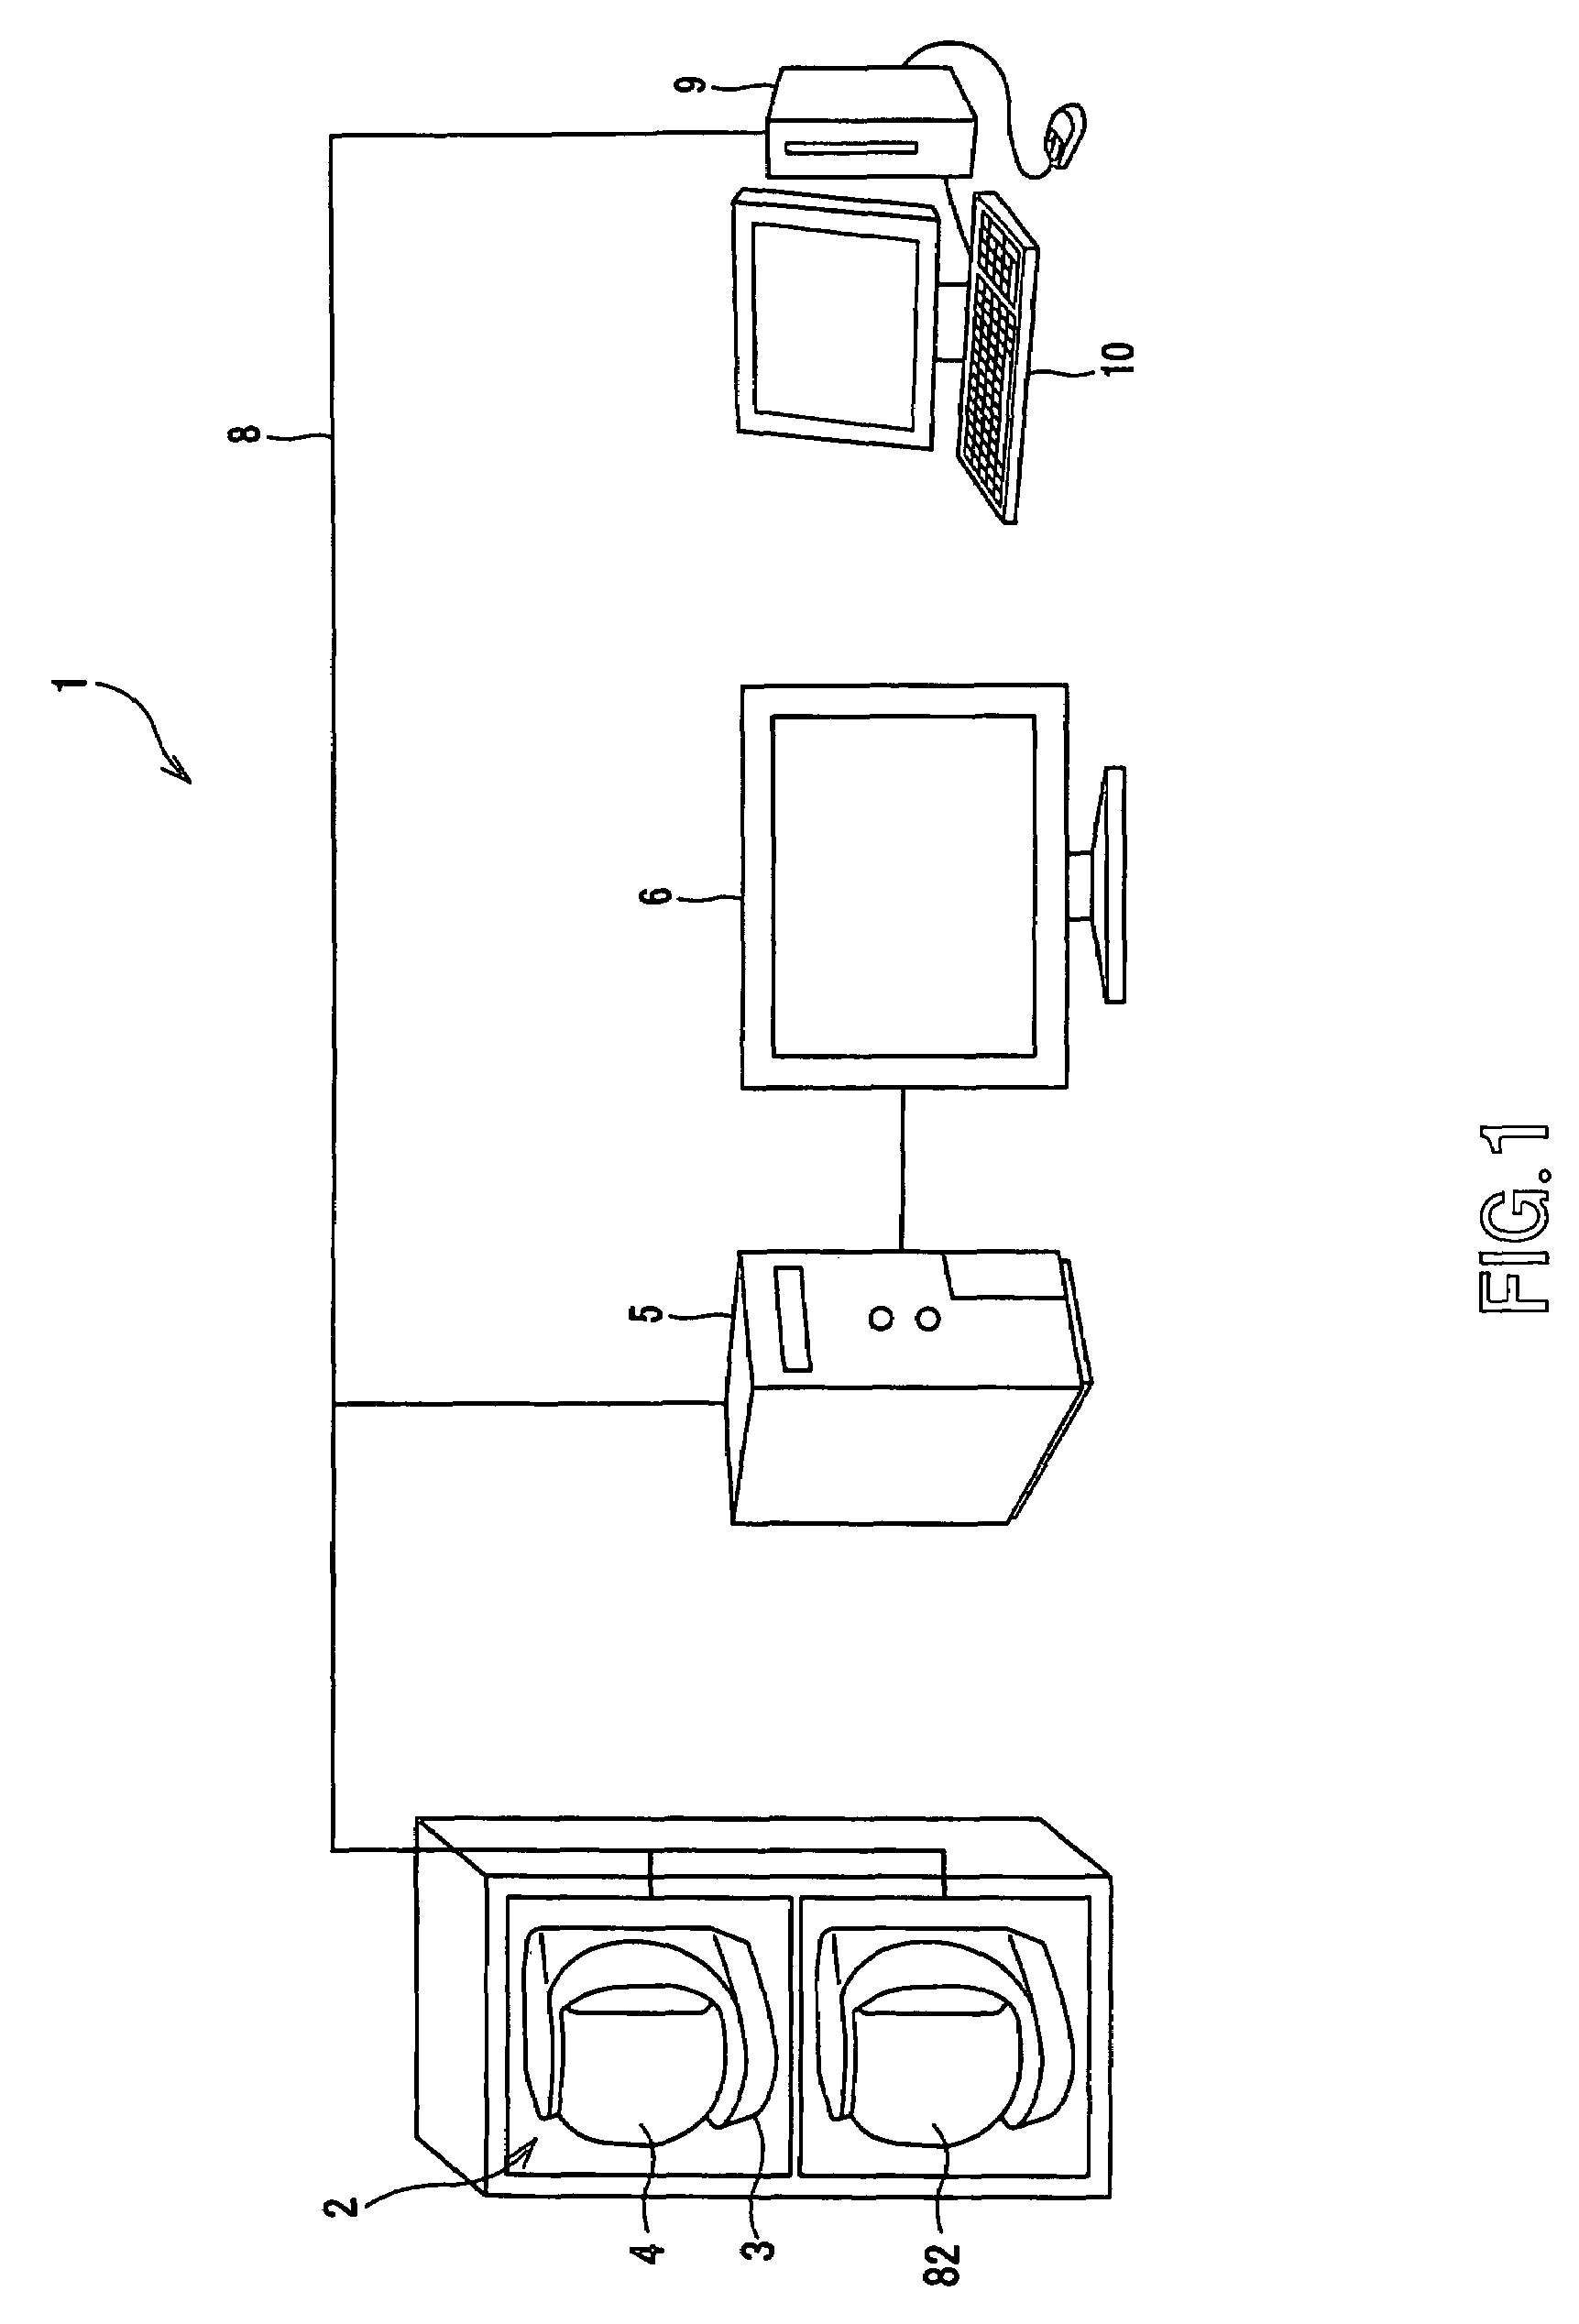 Imaging device and method, computer program product on computer-readable medium, and imaging system